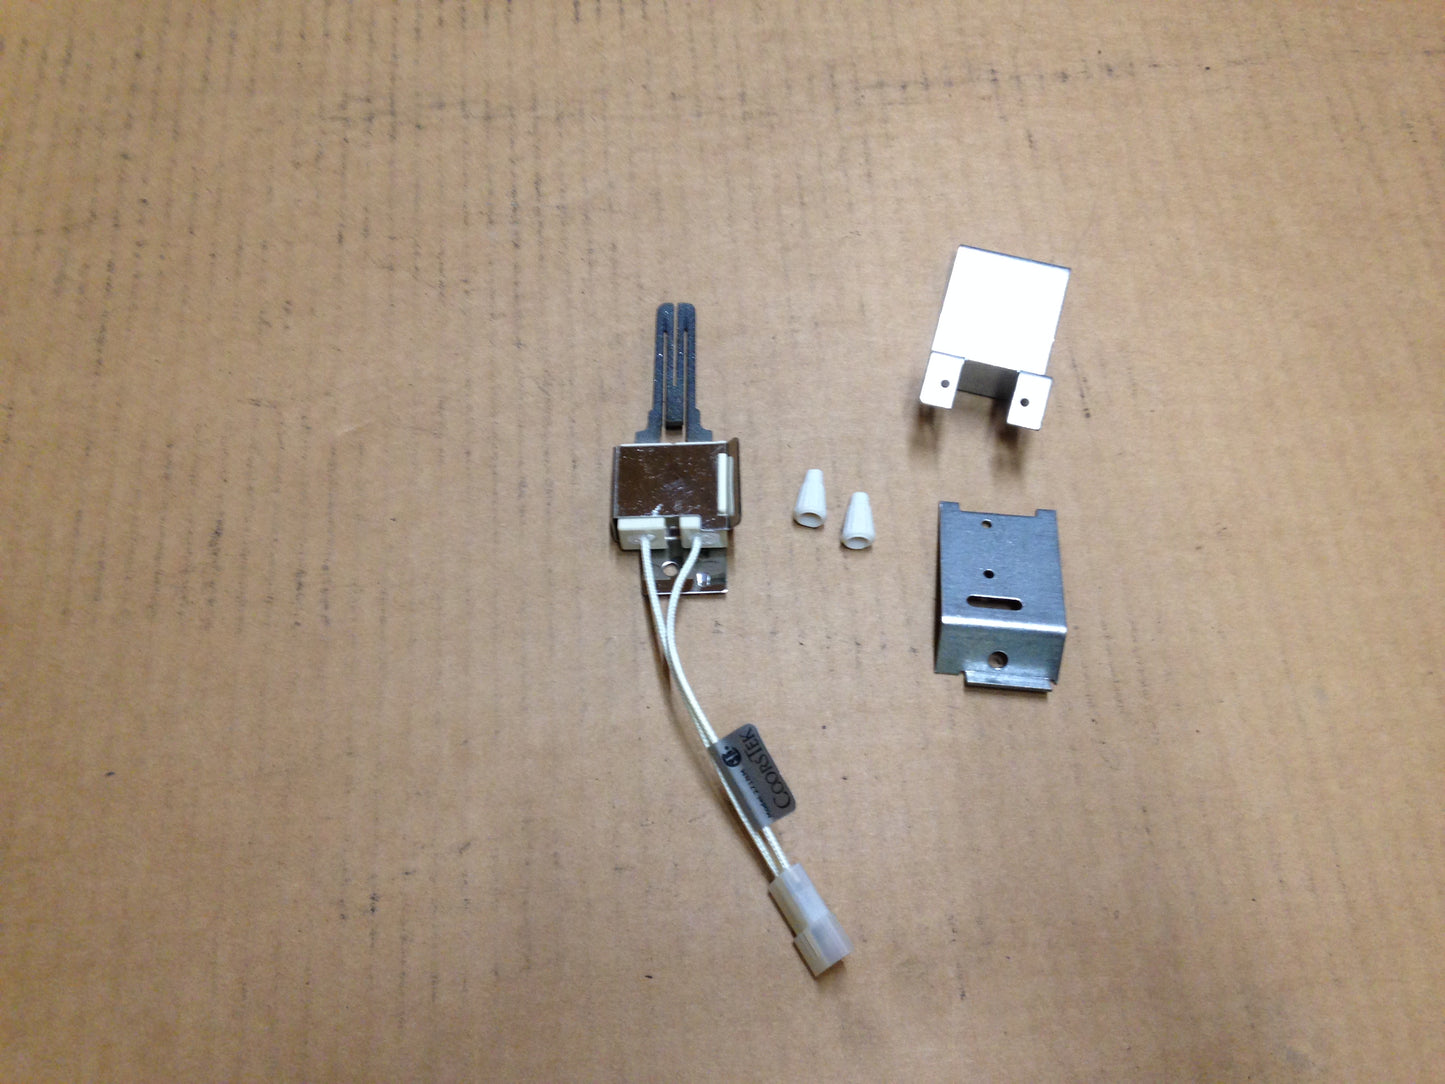 HOT SURFACE IGNITOR REPLACEMENT KIT, VOLTS:120, HERTZ:60, AMPS:5